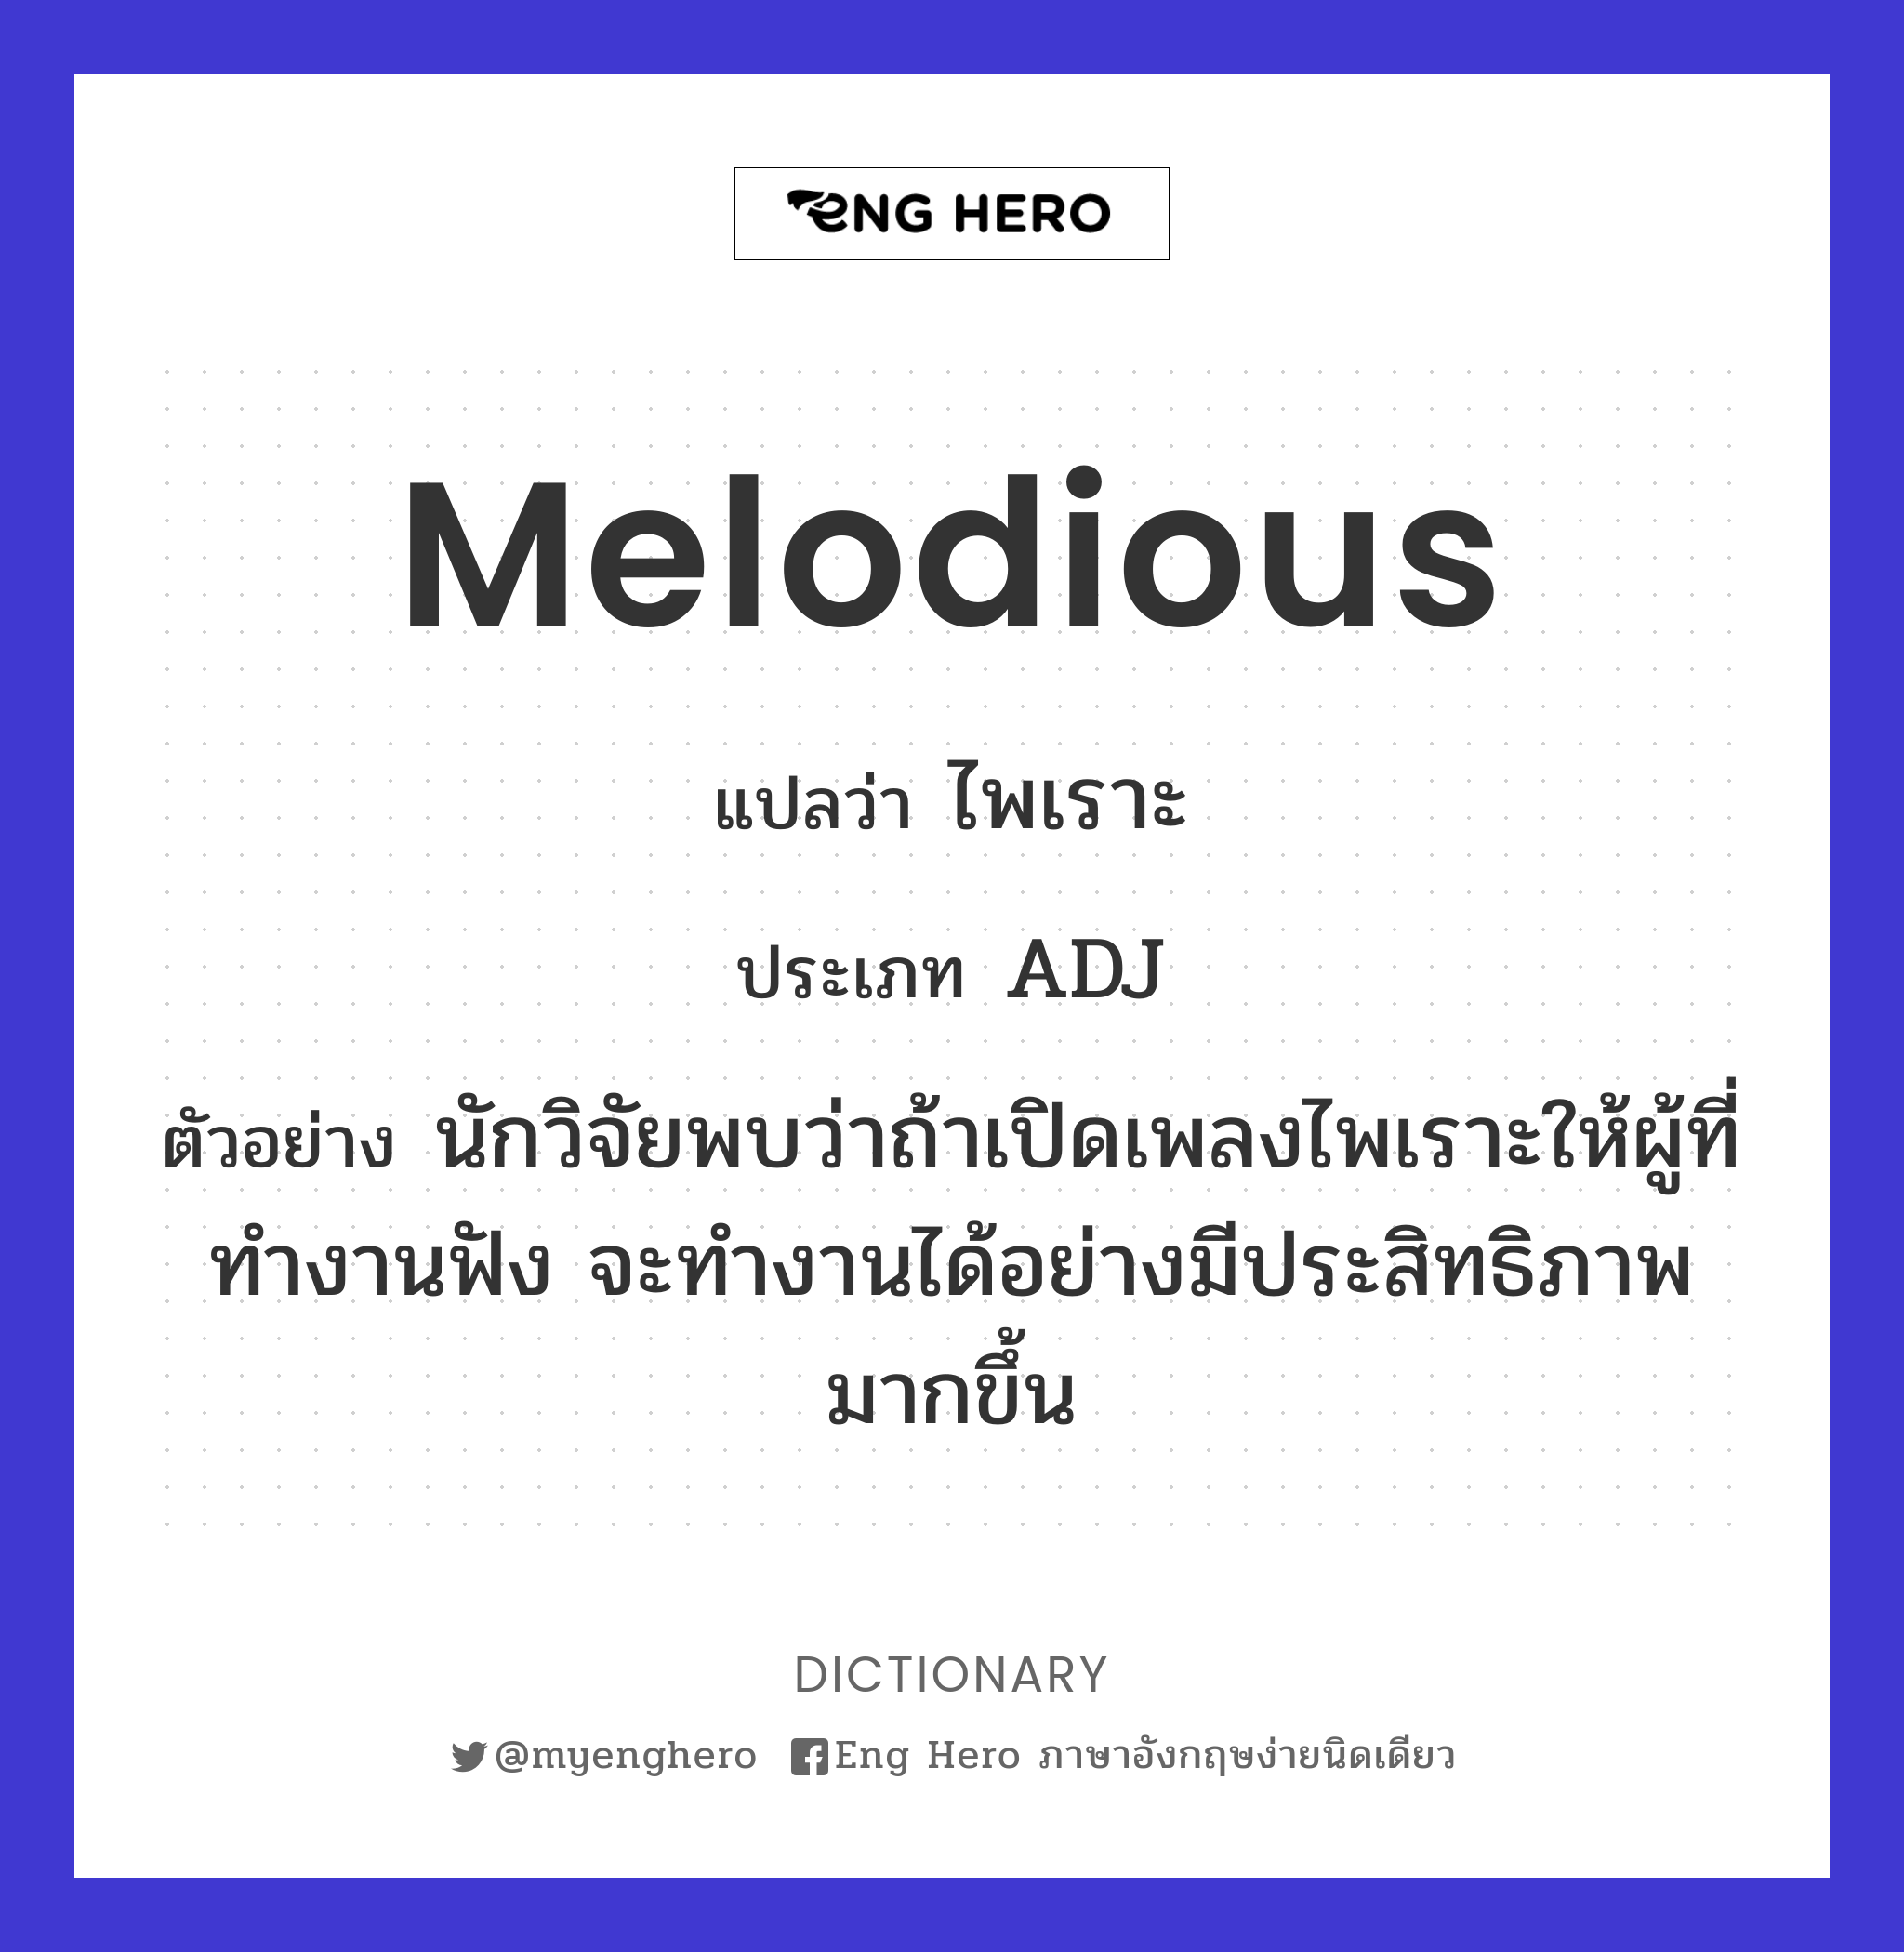 melodious